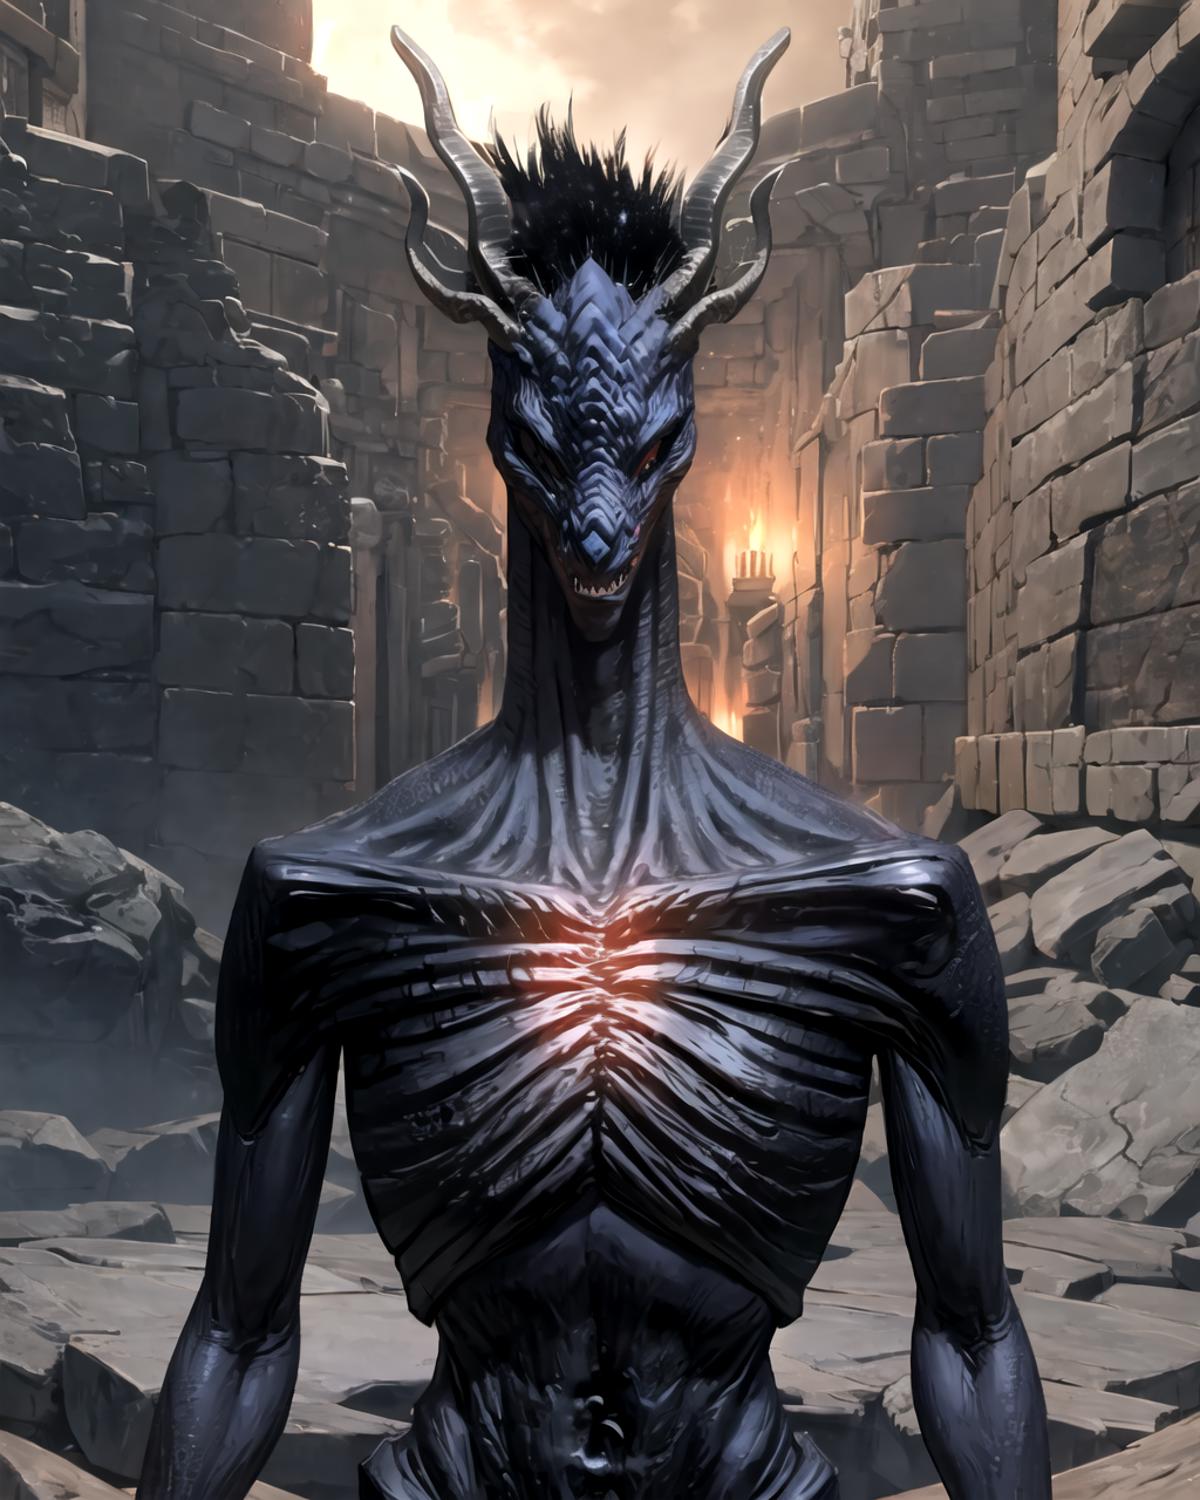 Dragon Form | Dark Souls 3 image by Finore